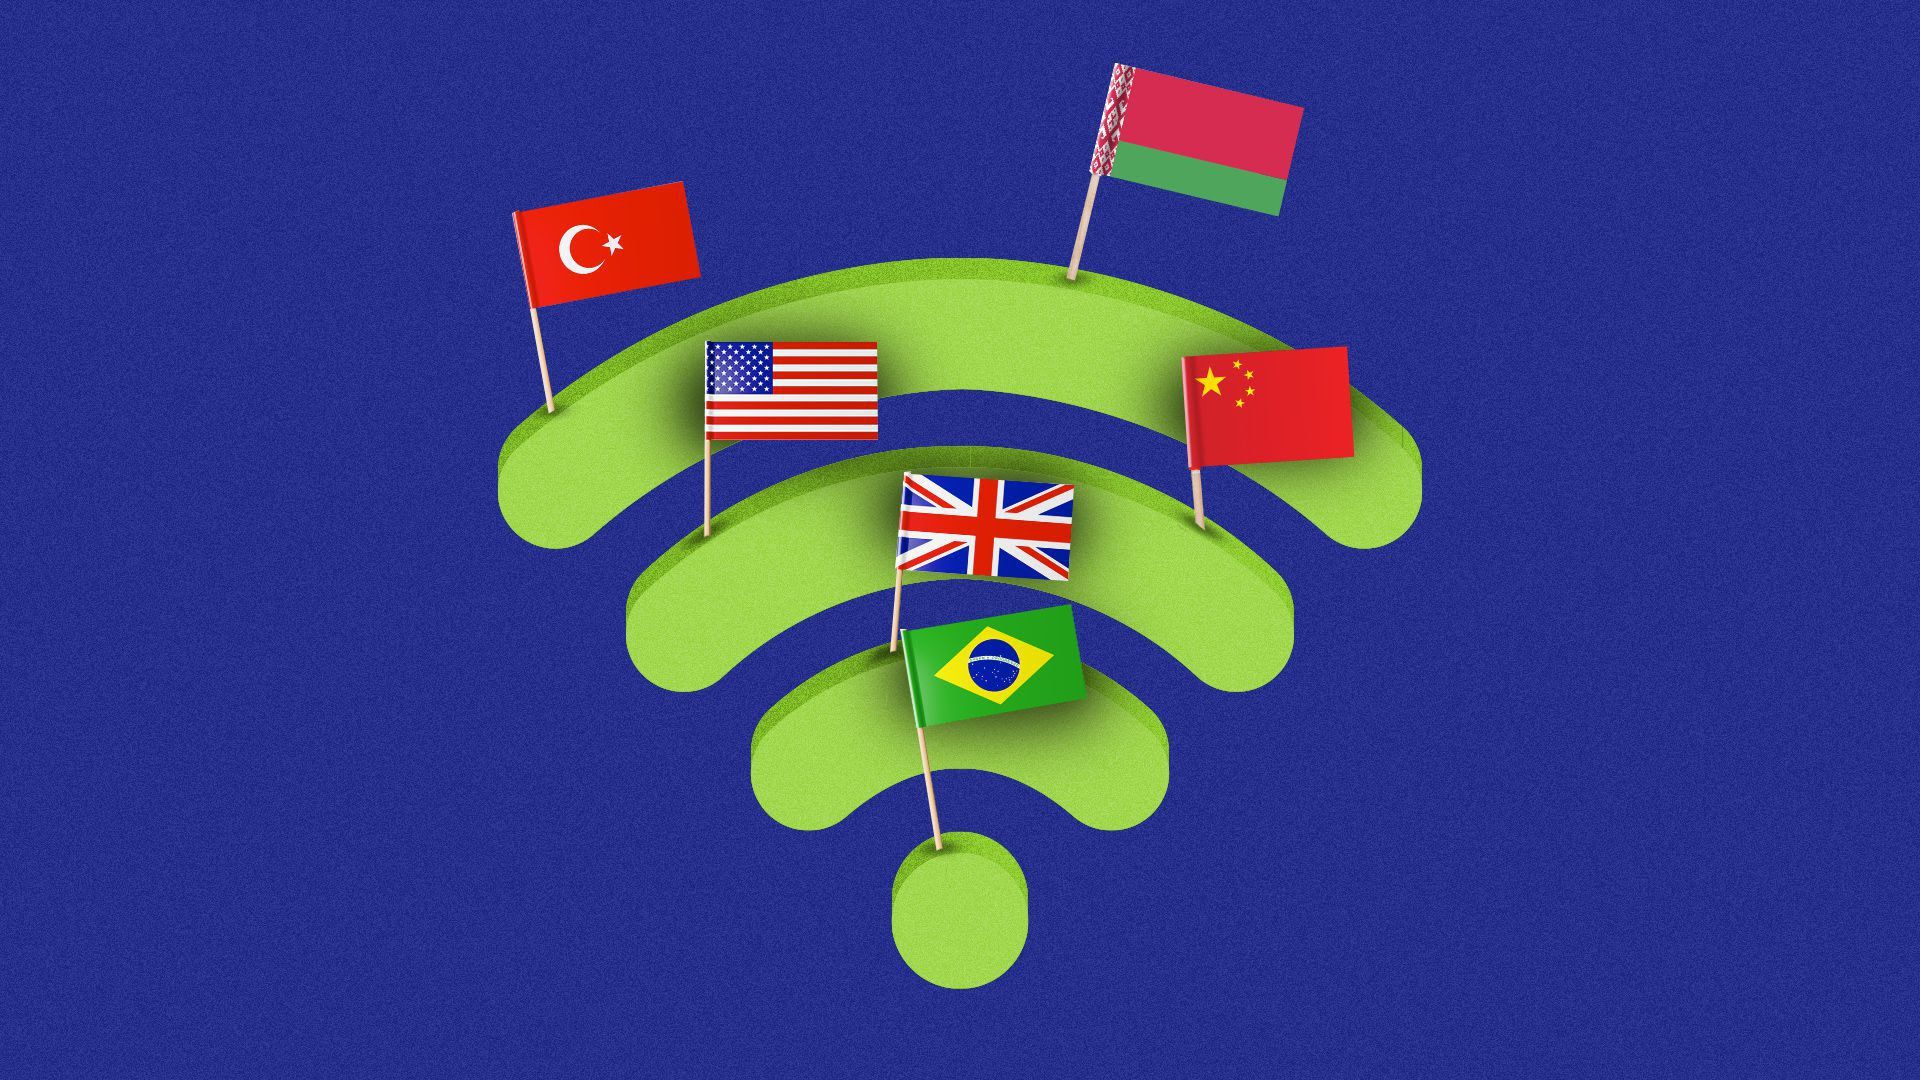 an illustration of flags on an internet symbol.